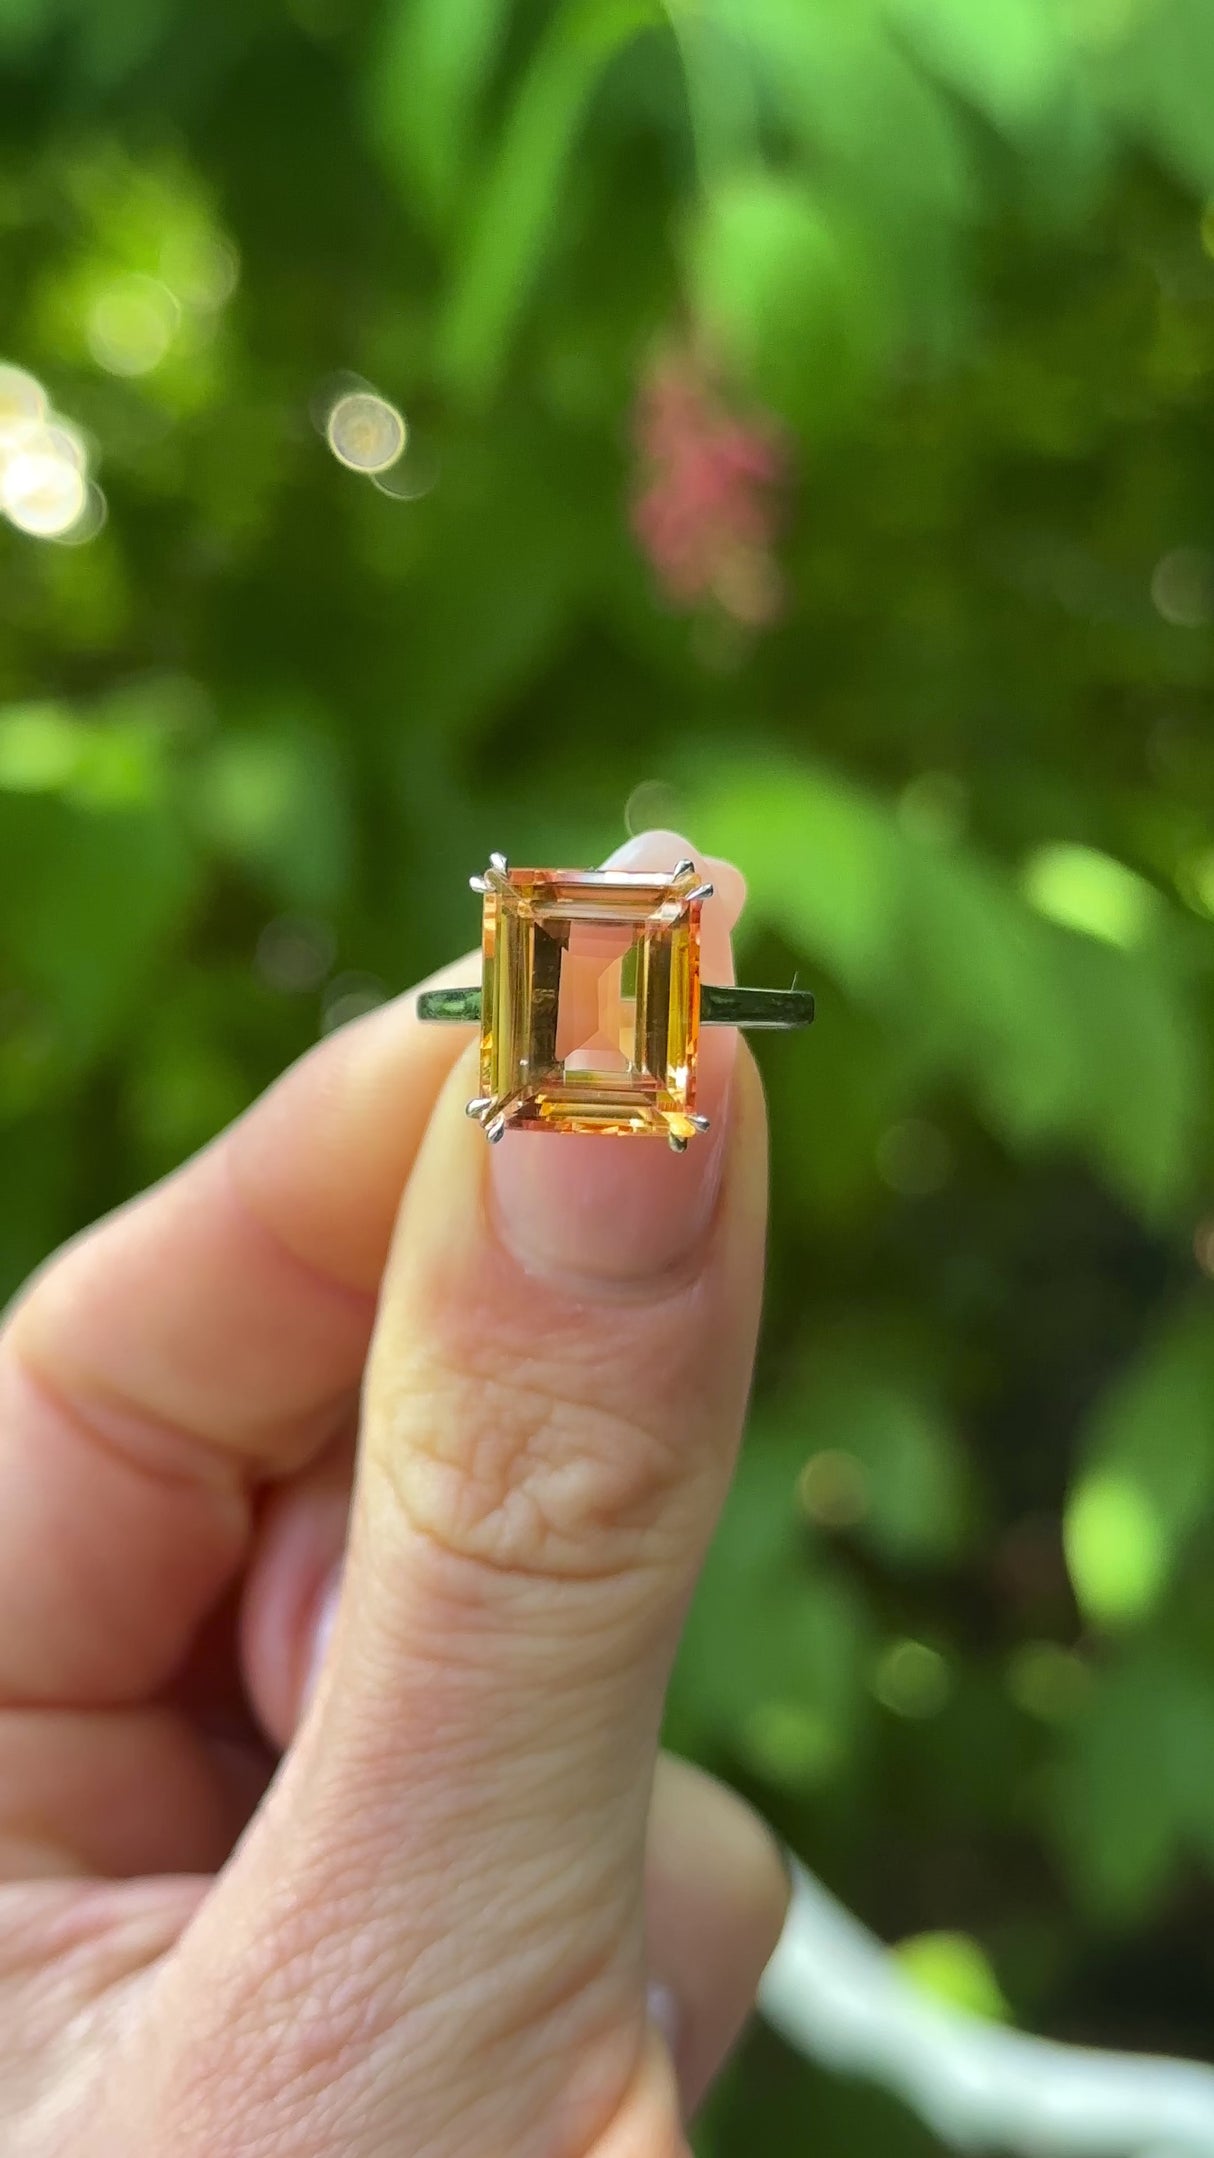 Vintage, Imperial Topaz Single-Stone Ring, 18ct White Gold held in fingers.